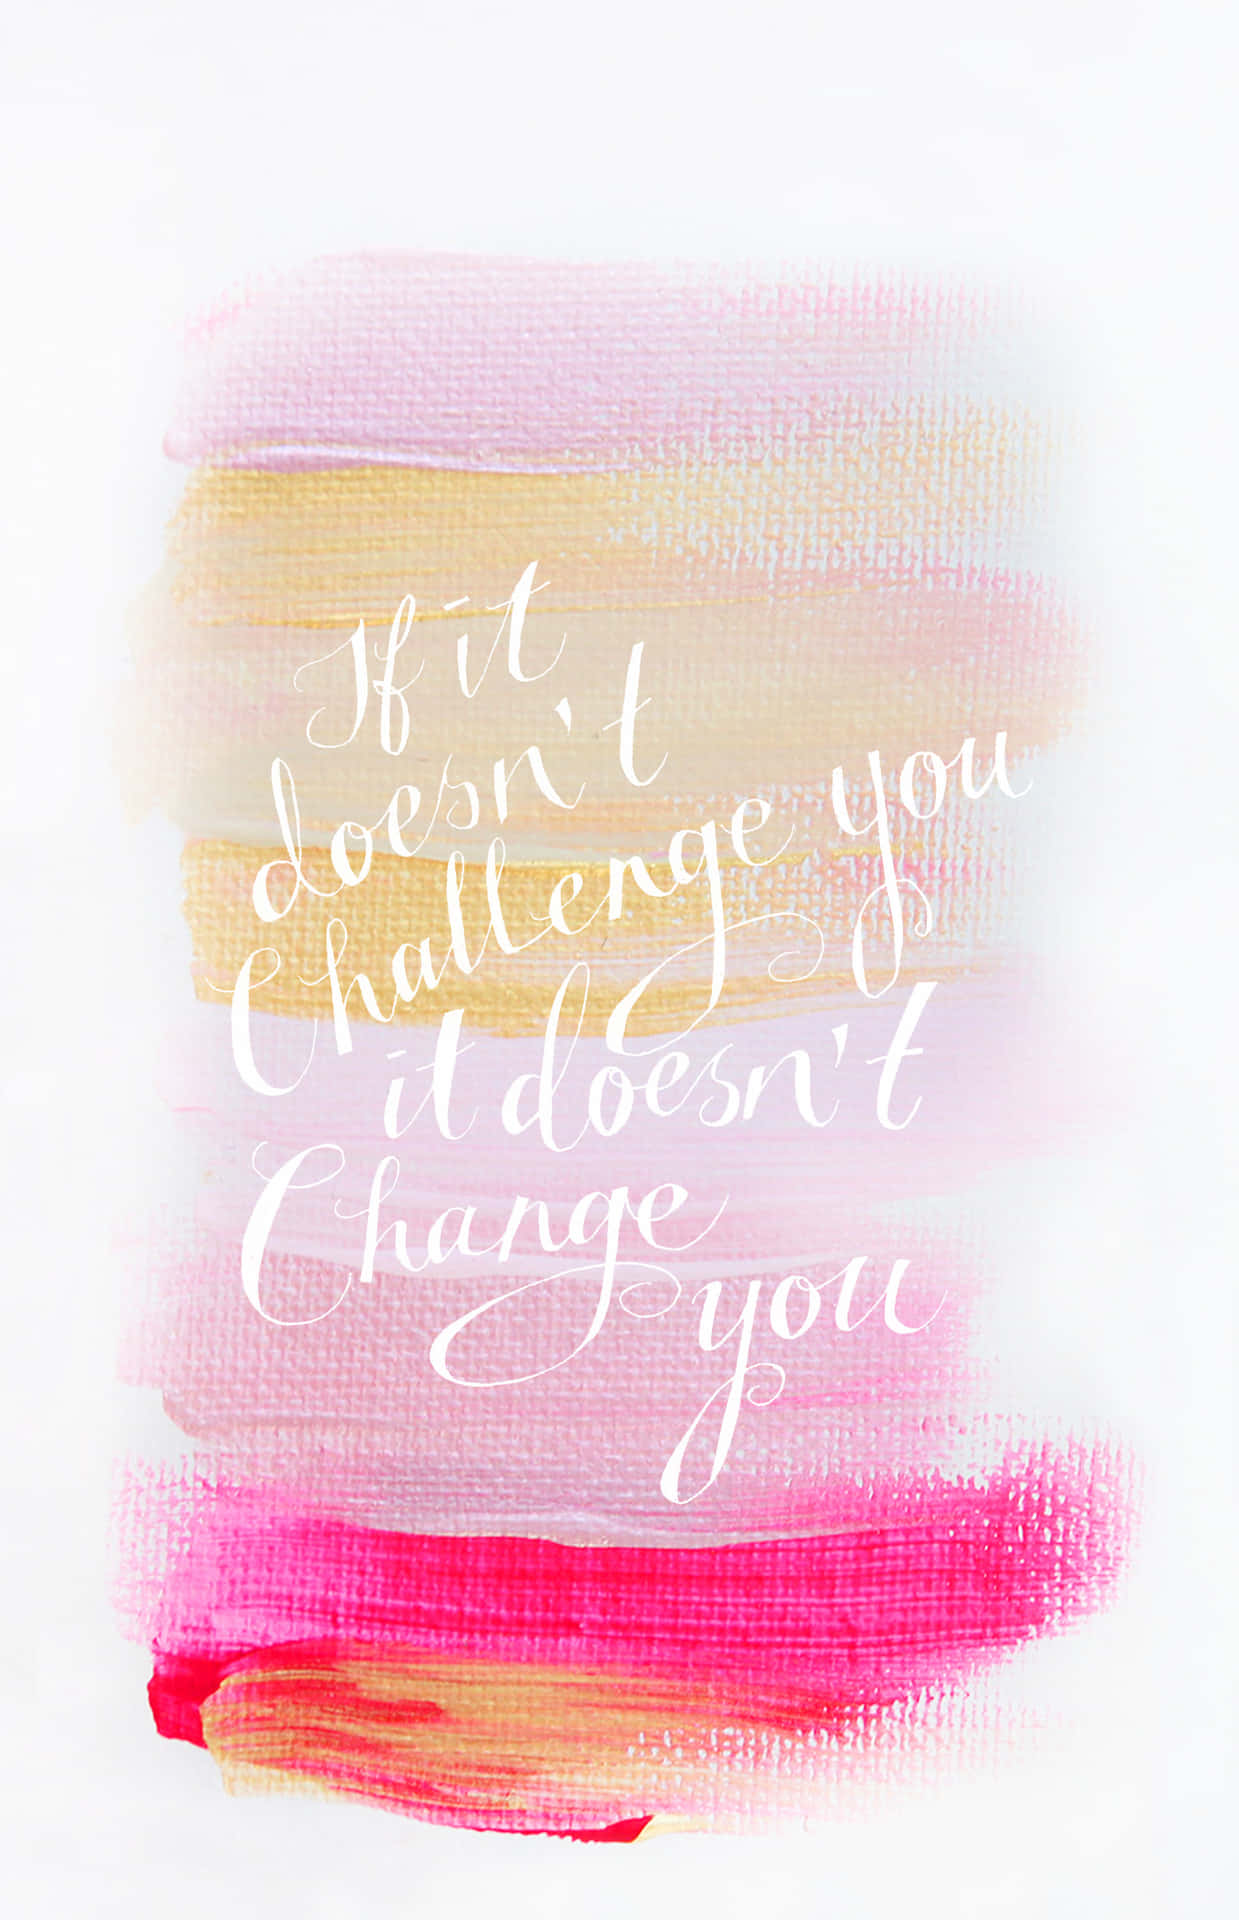 If You Don't Challenge Yourself You Won't Change You